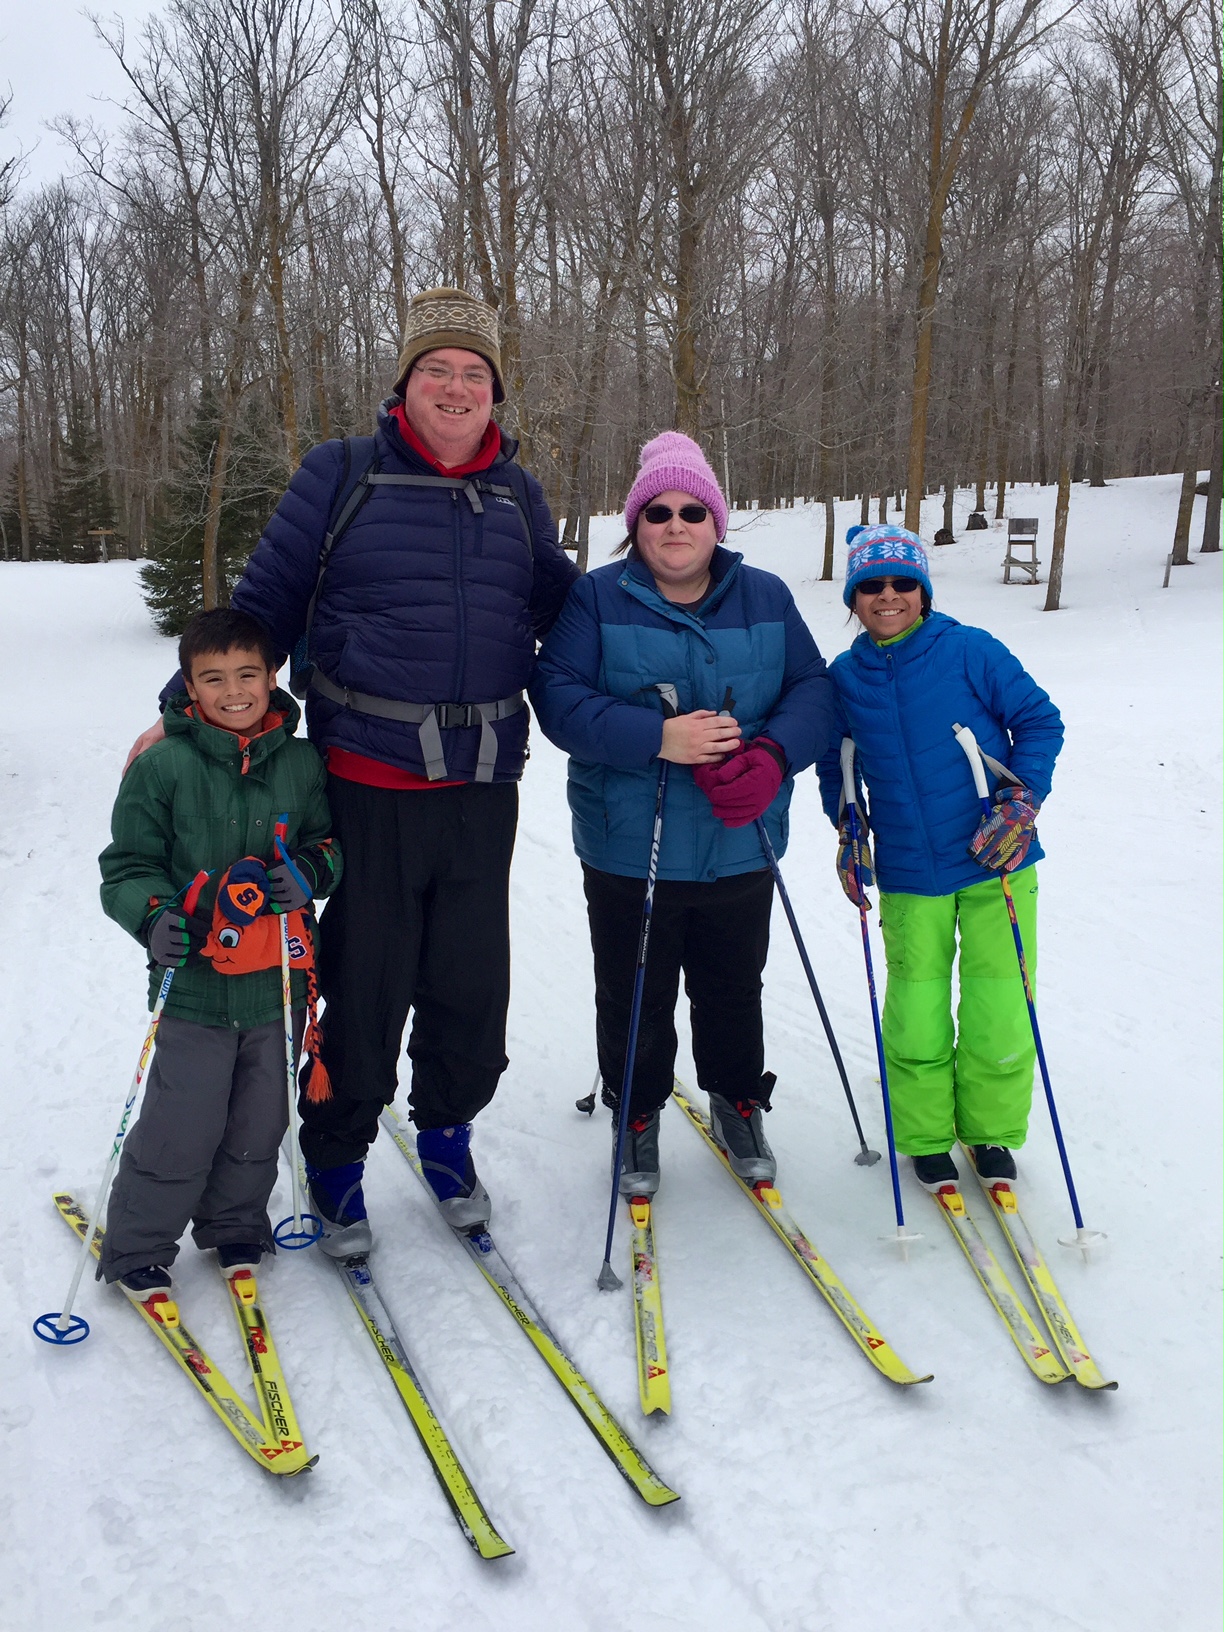 Ed D'Avignon family after a Saturday morning first time ski lesson. February 20th, 2016.